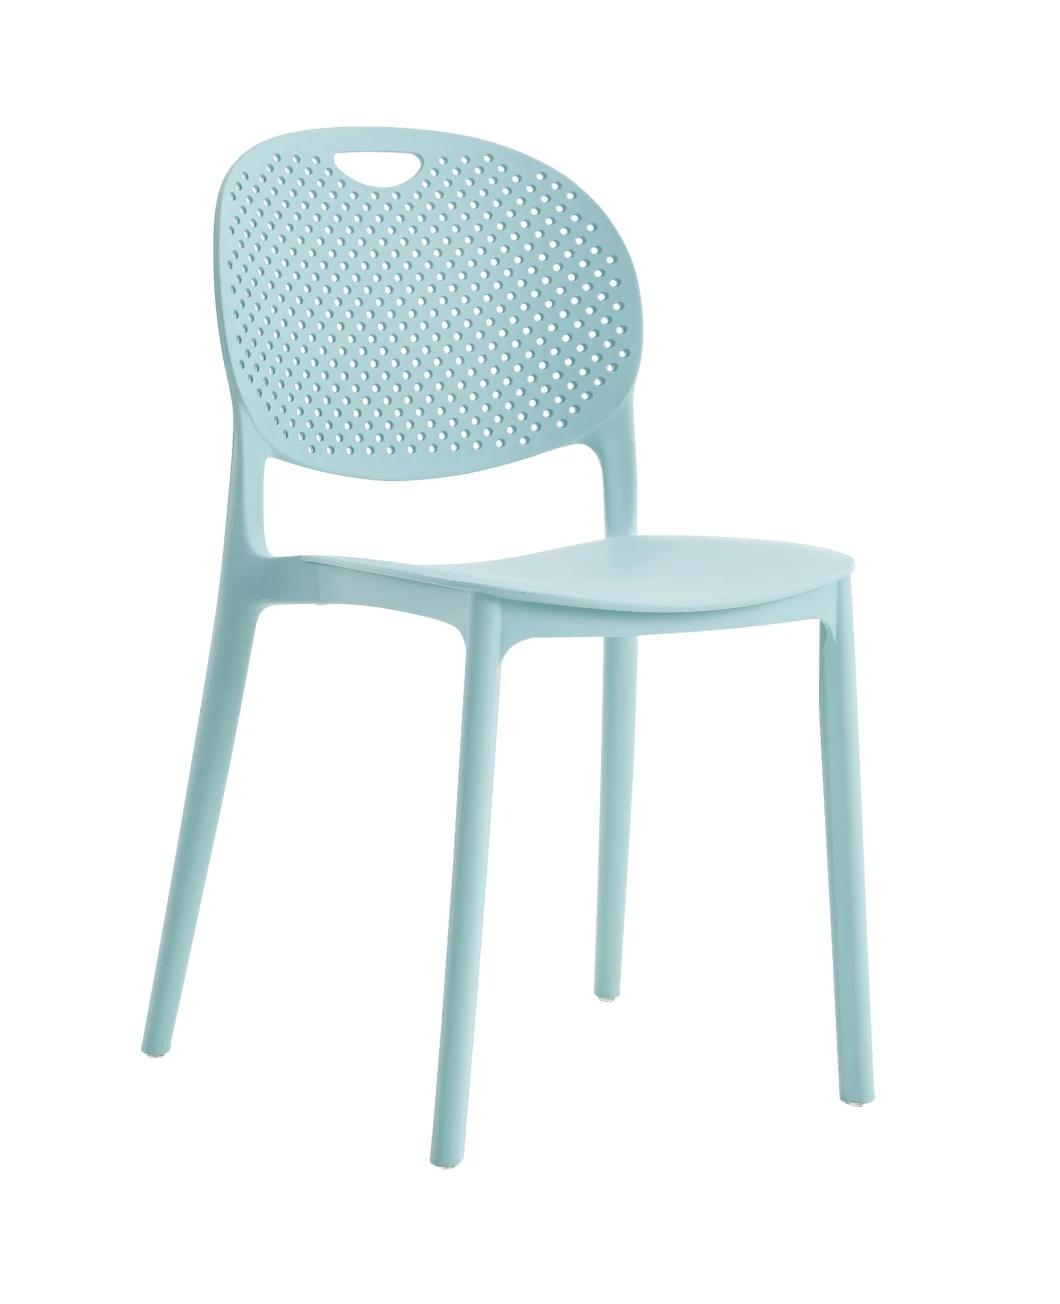 Outdoor Cheap Durable Wholesale PP Chairs Nordic Stackable Monoblock Design Price Modern Colored Plastic Dining Chair Sales